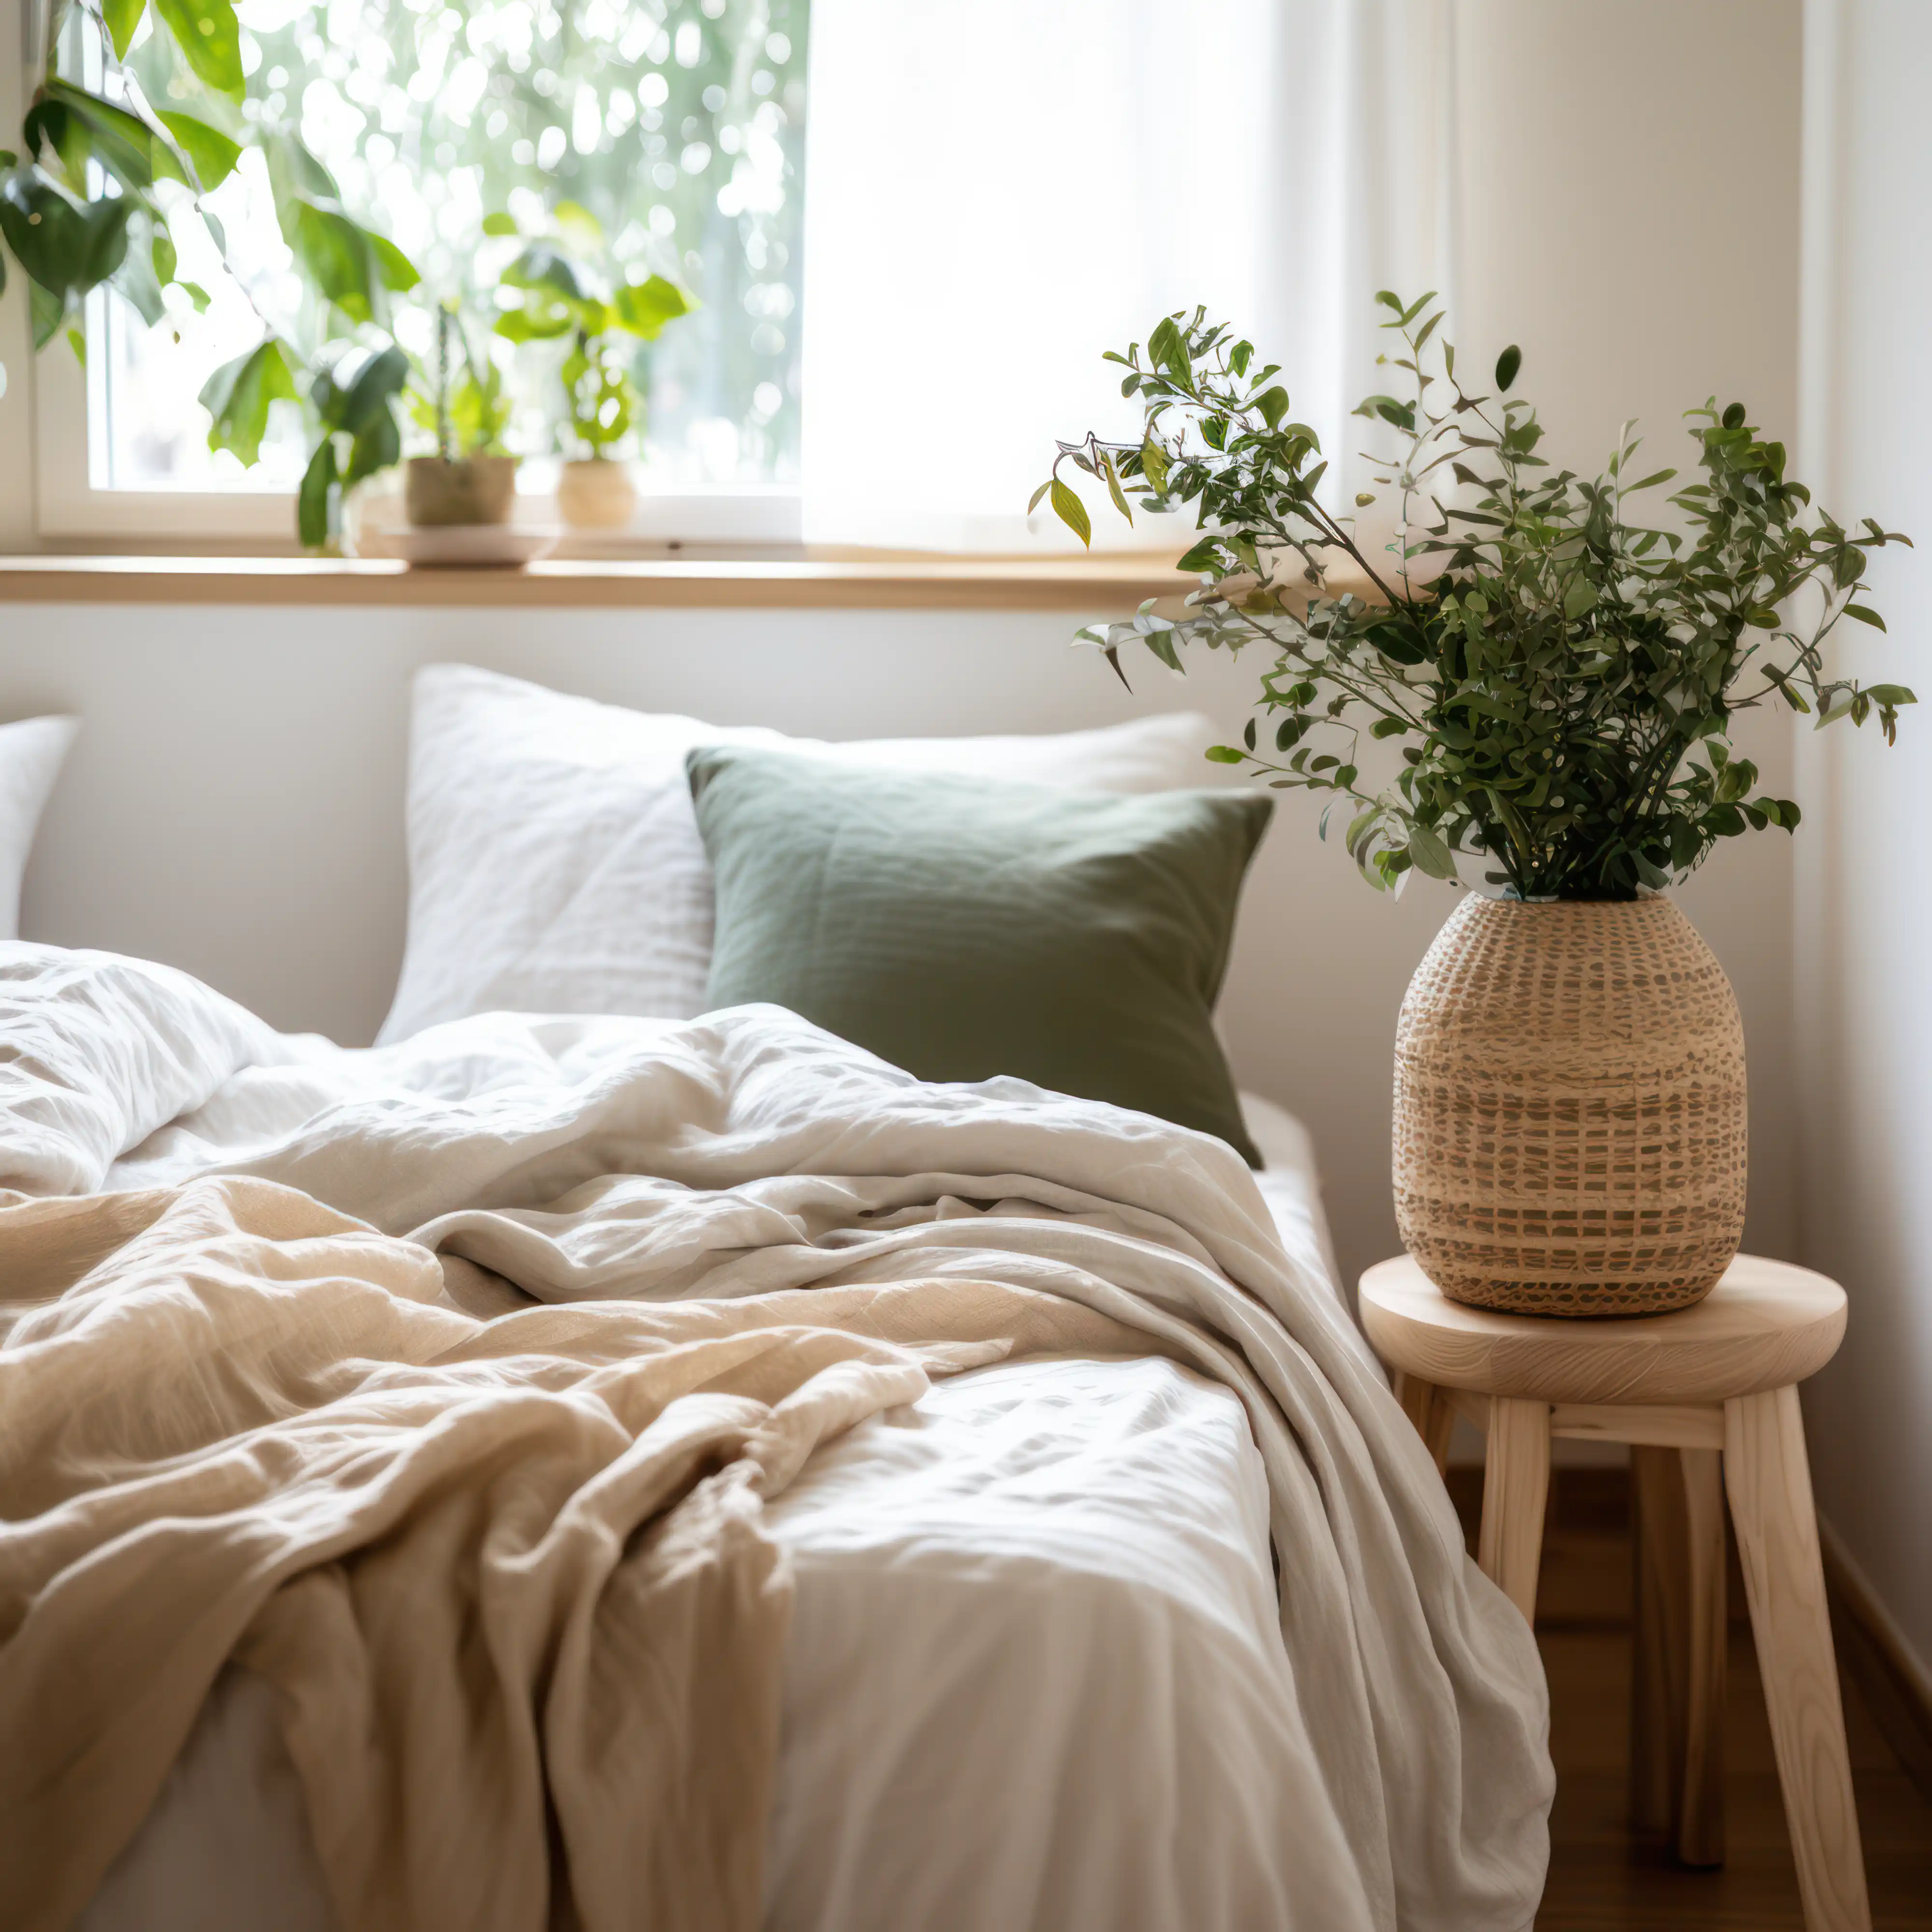 Bright bedroom interior with green pillow, white linens, and potted plant on wooden stool, interior by Sarah Brown Design